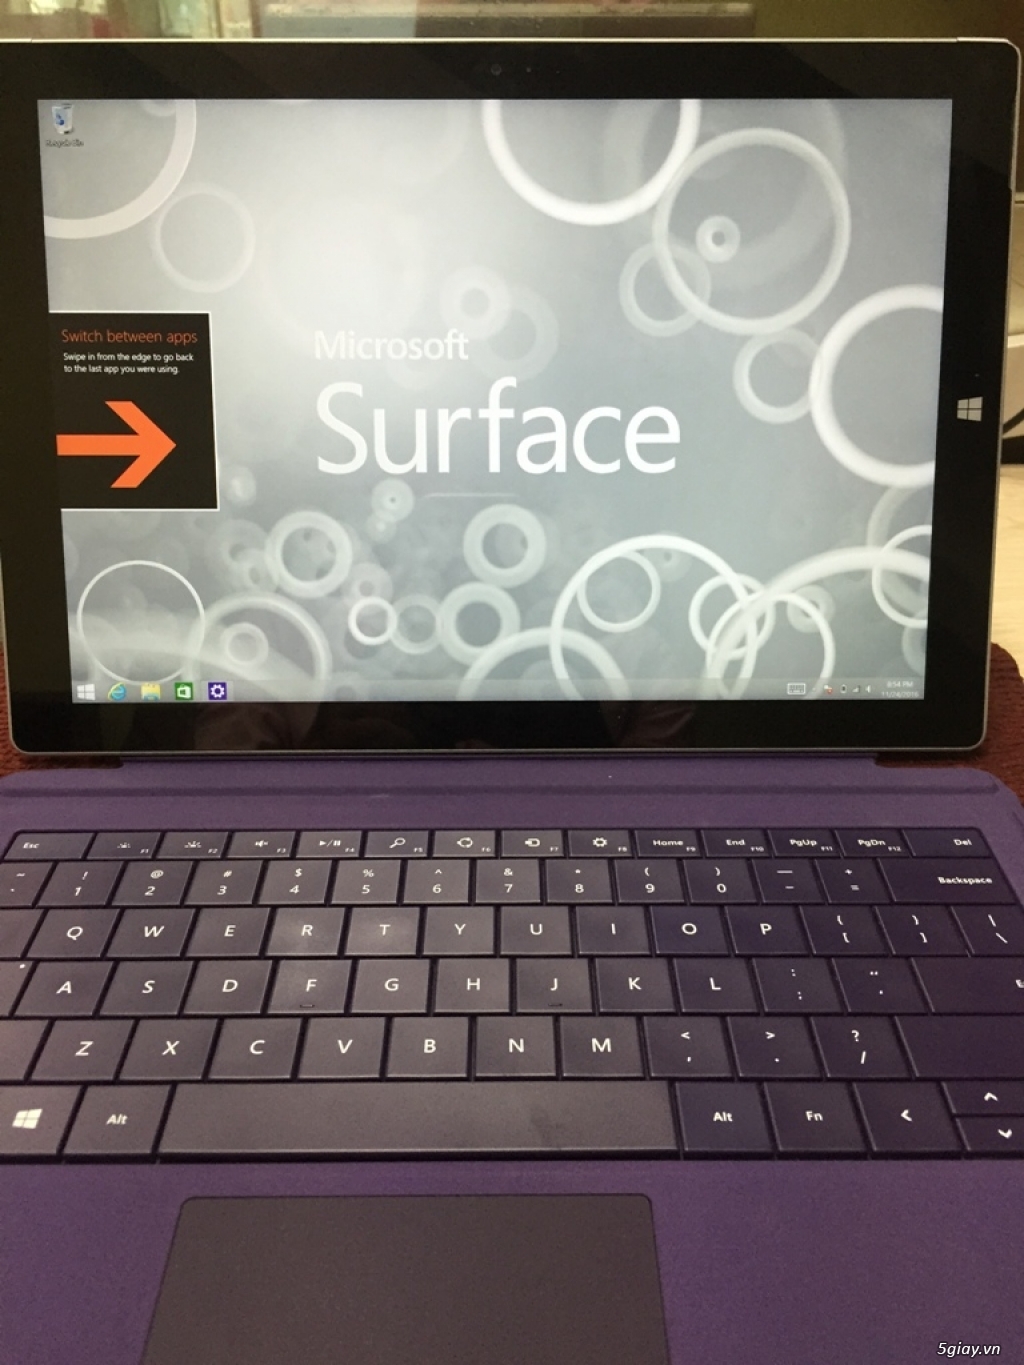 Surface Pro 3 - i5/ 4GB/ 128GB - EXCELLENT condition (642453) - 2